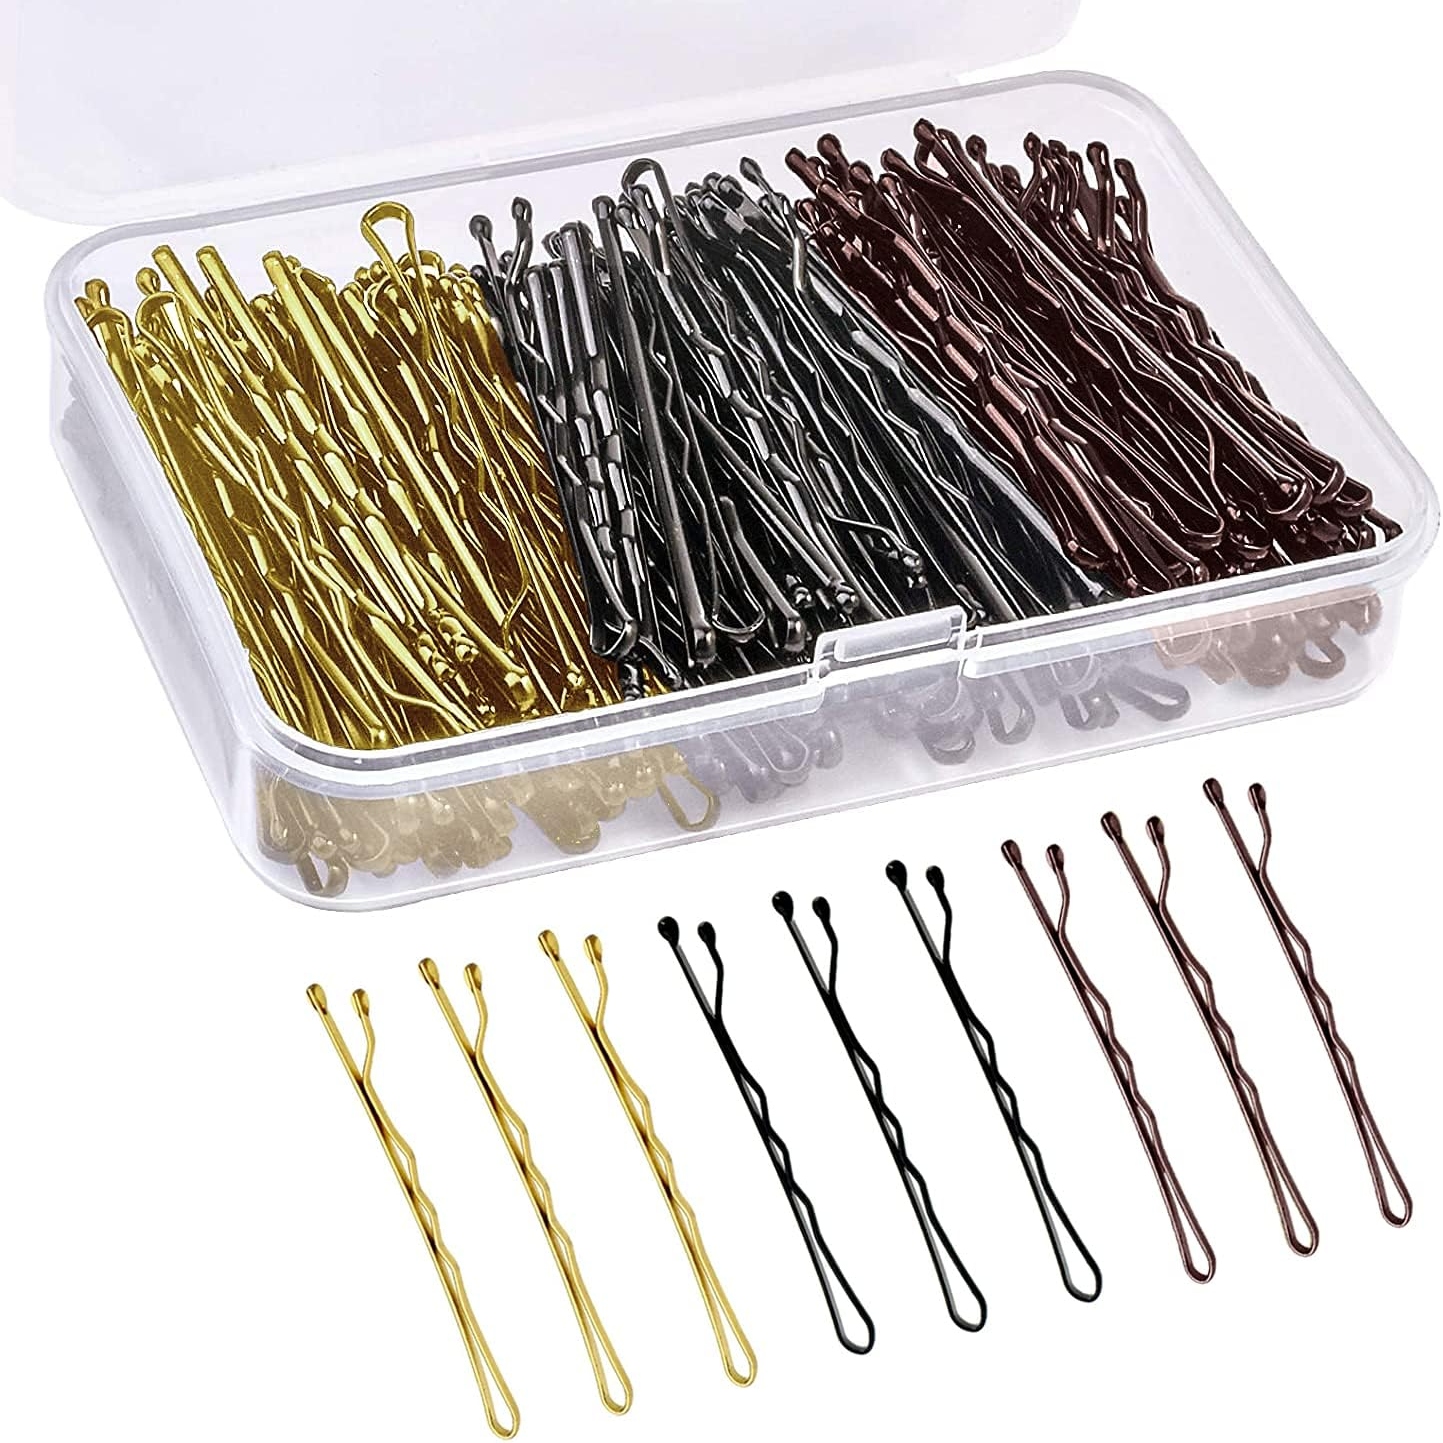 OWill 150 Bobby Pins in Black, Blonde and Brunette